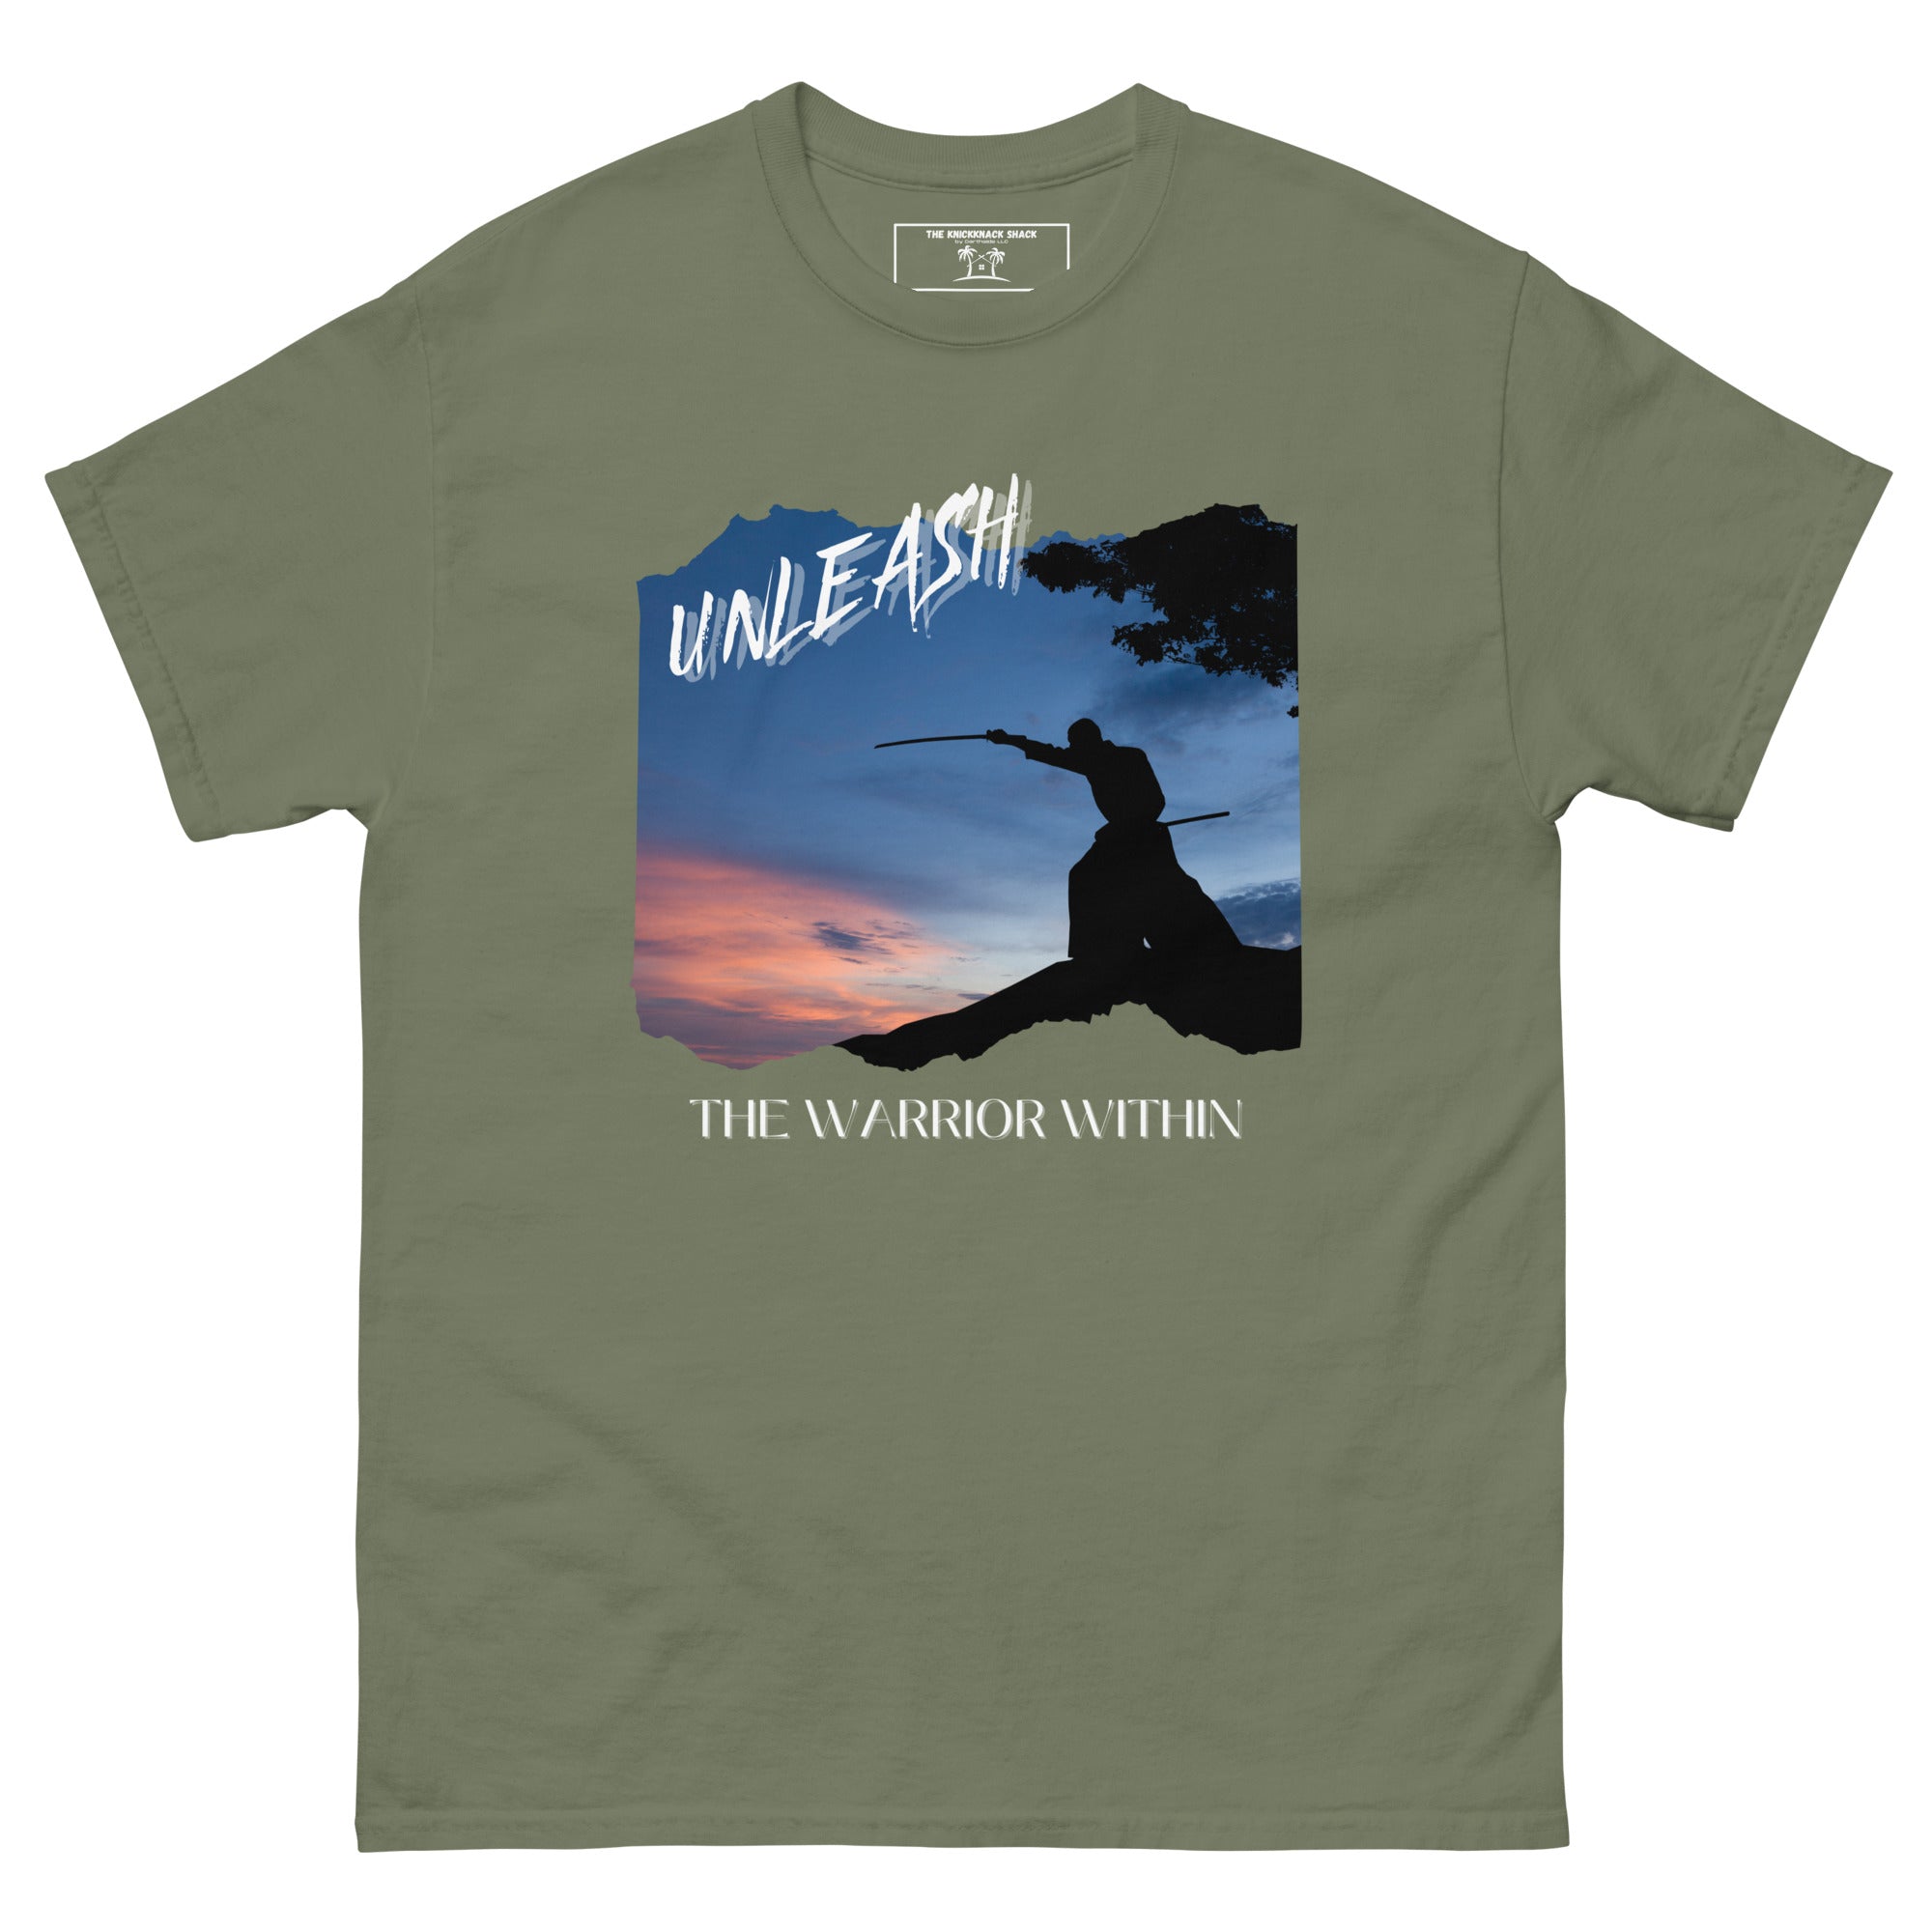 Tee-shirt classique - Warrior Within 2 (couleurs sombres)